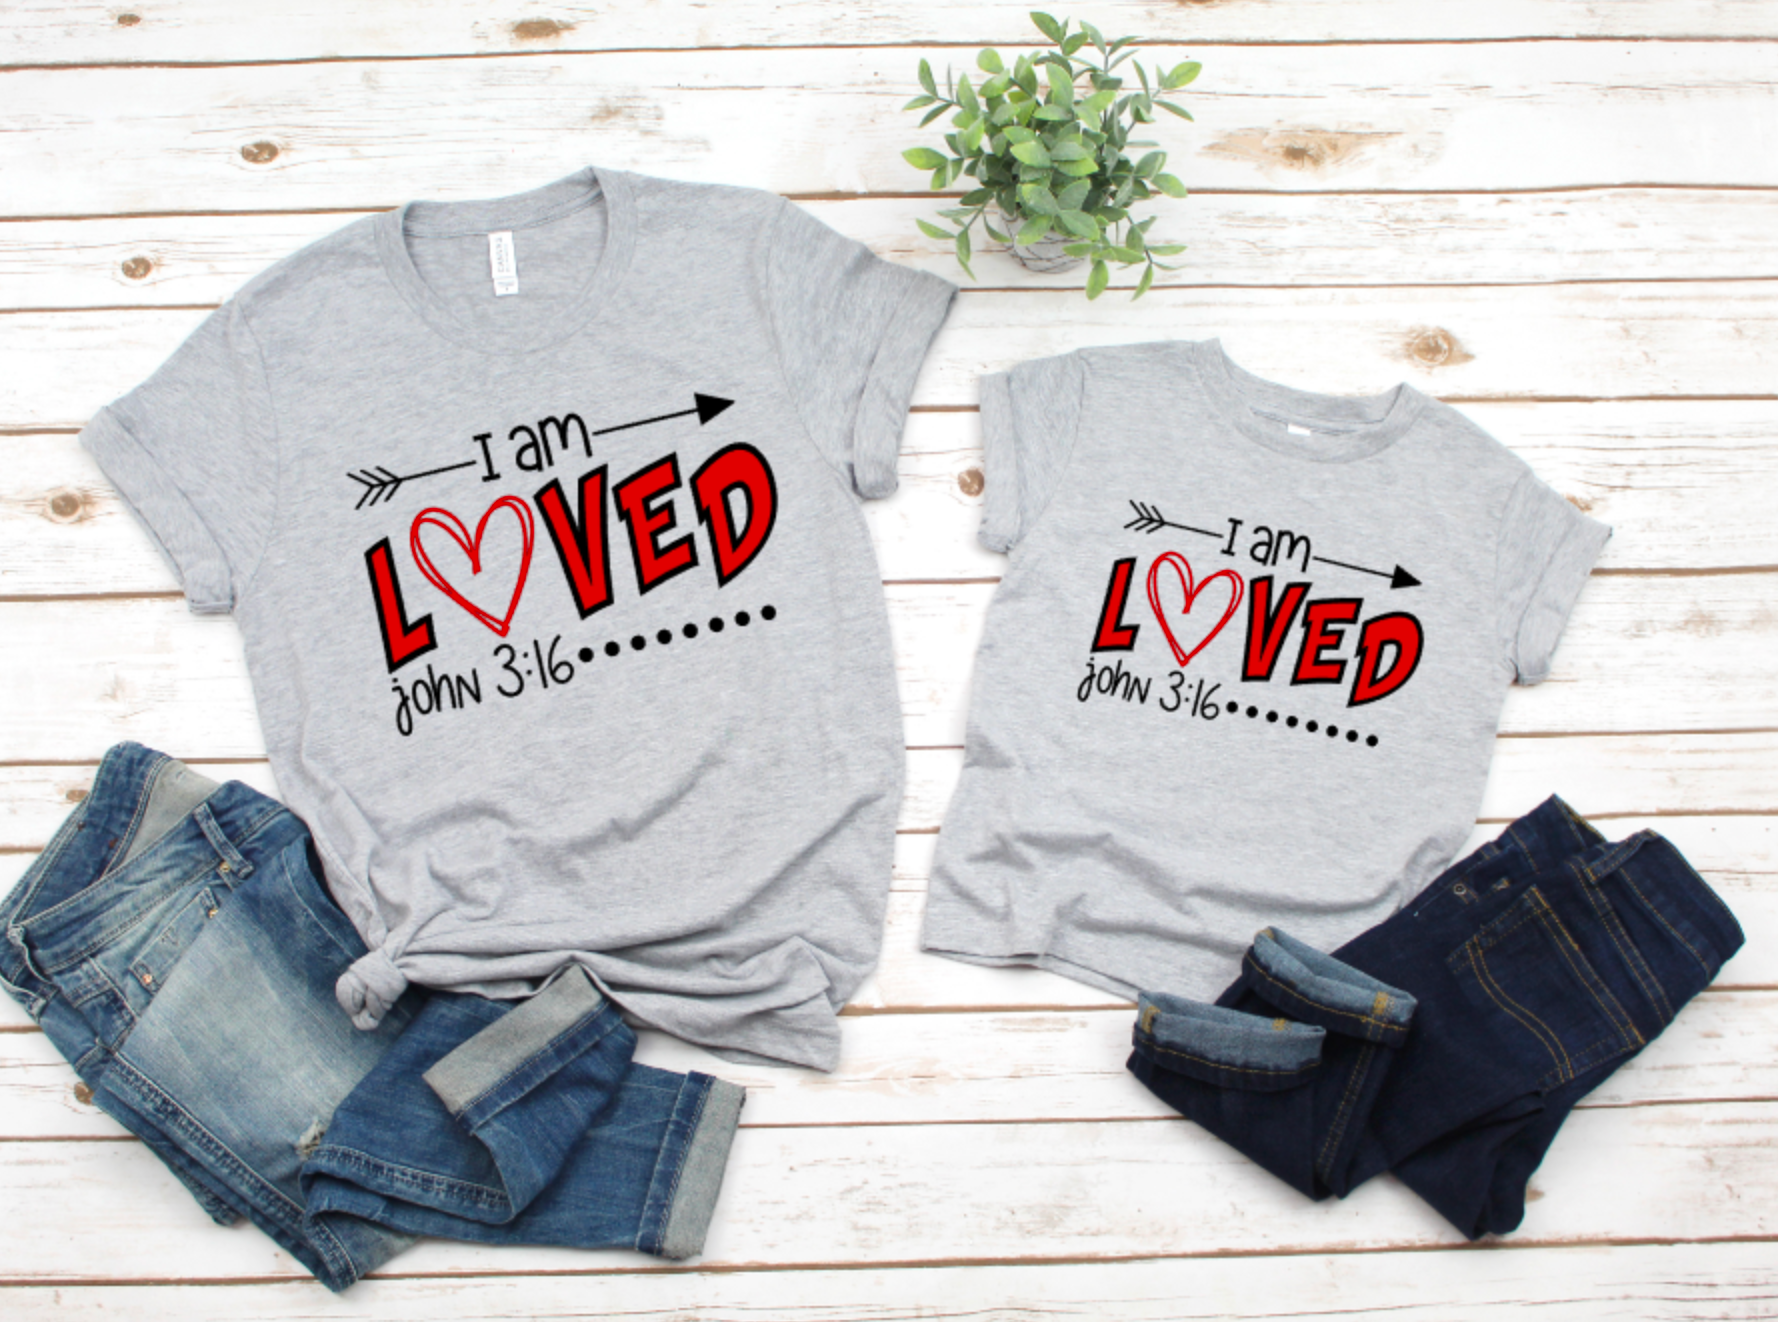 I am Loved John 3:16 unisex adult and youth tee